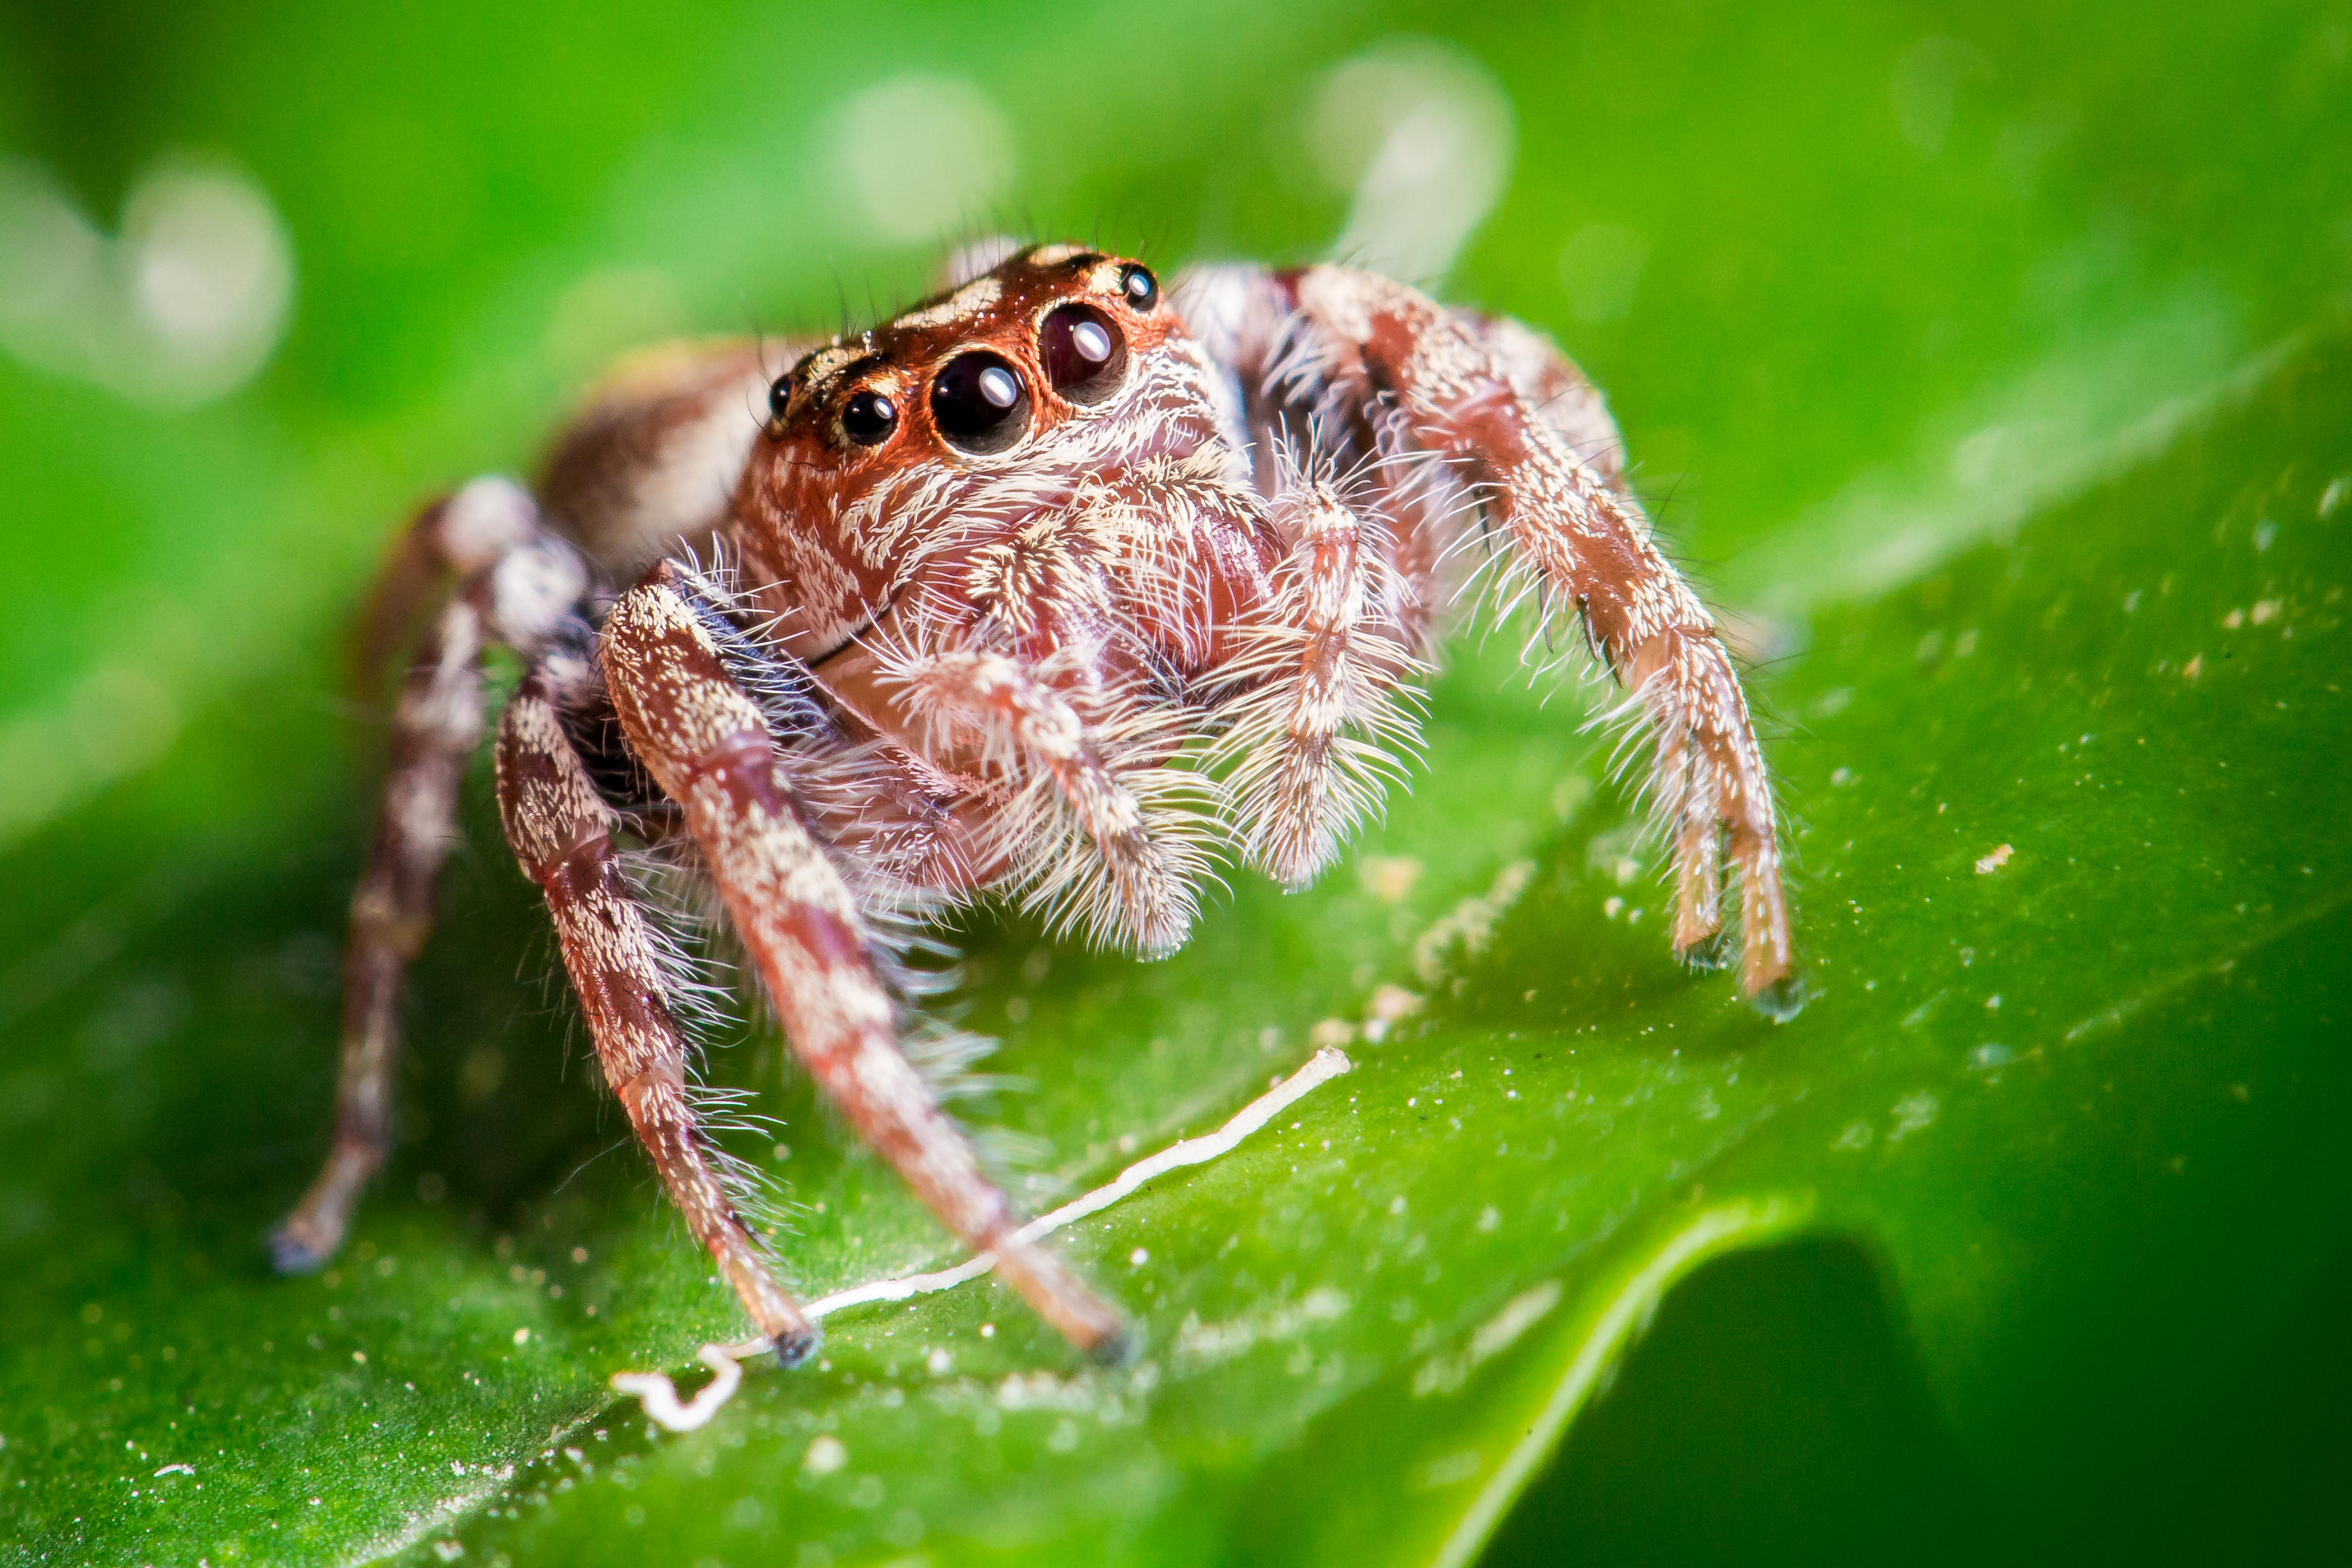 Jumping spiders may experience something like REM sleep | Ars Technica